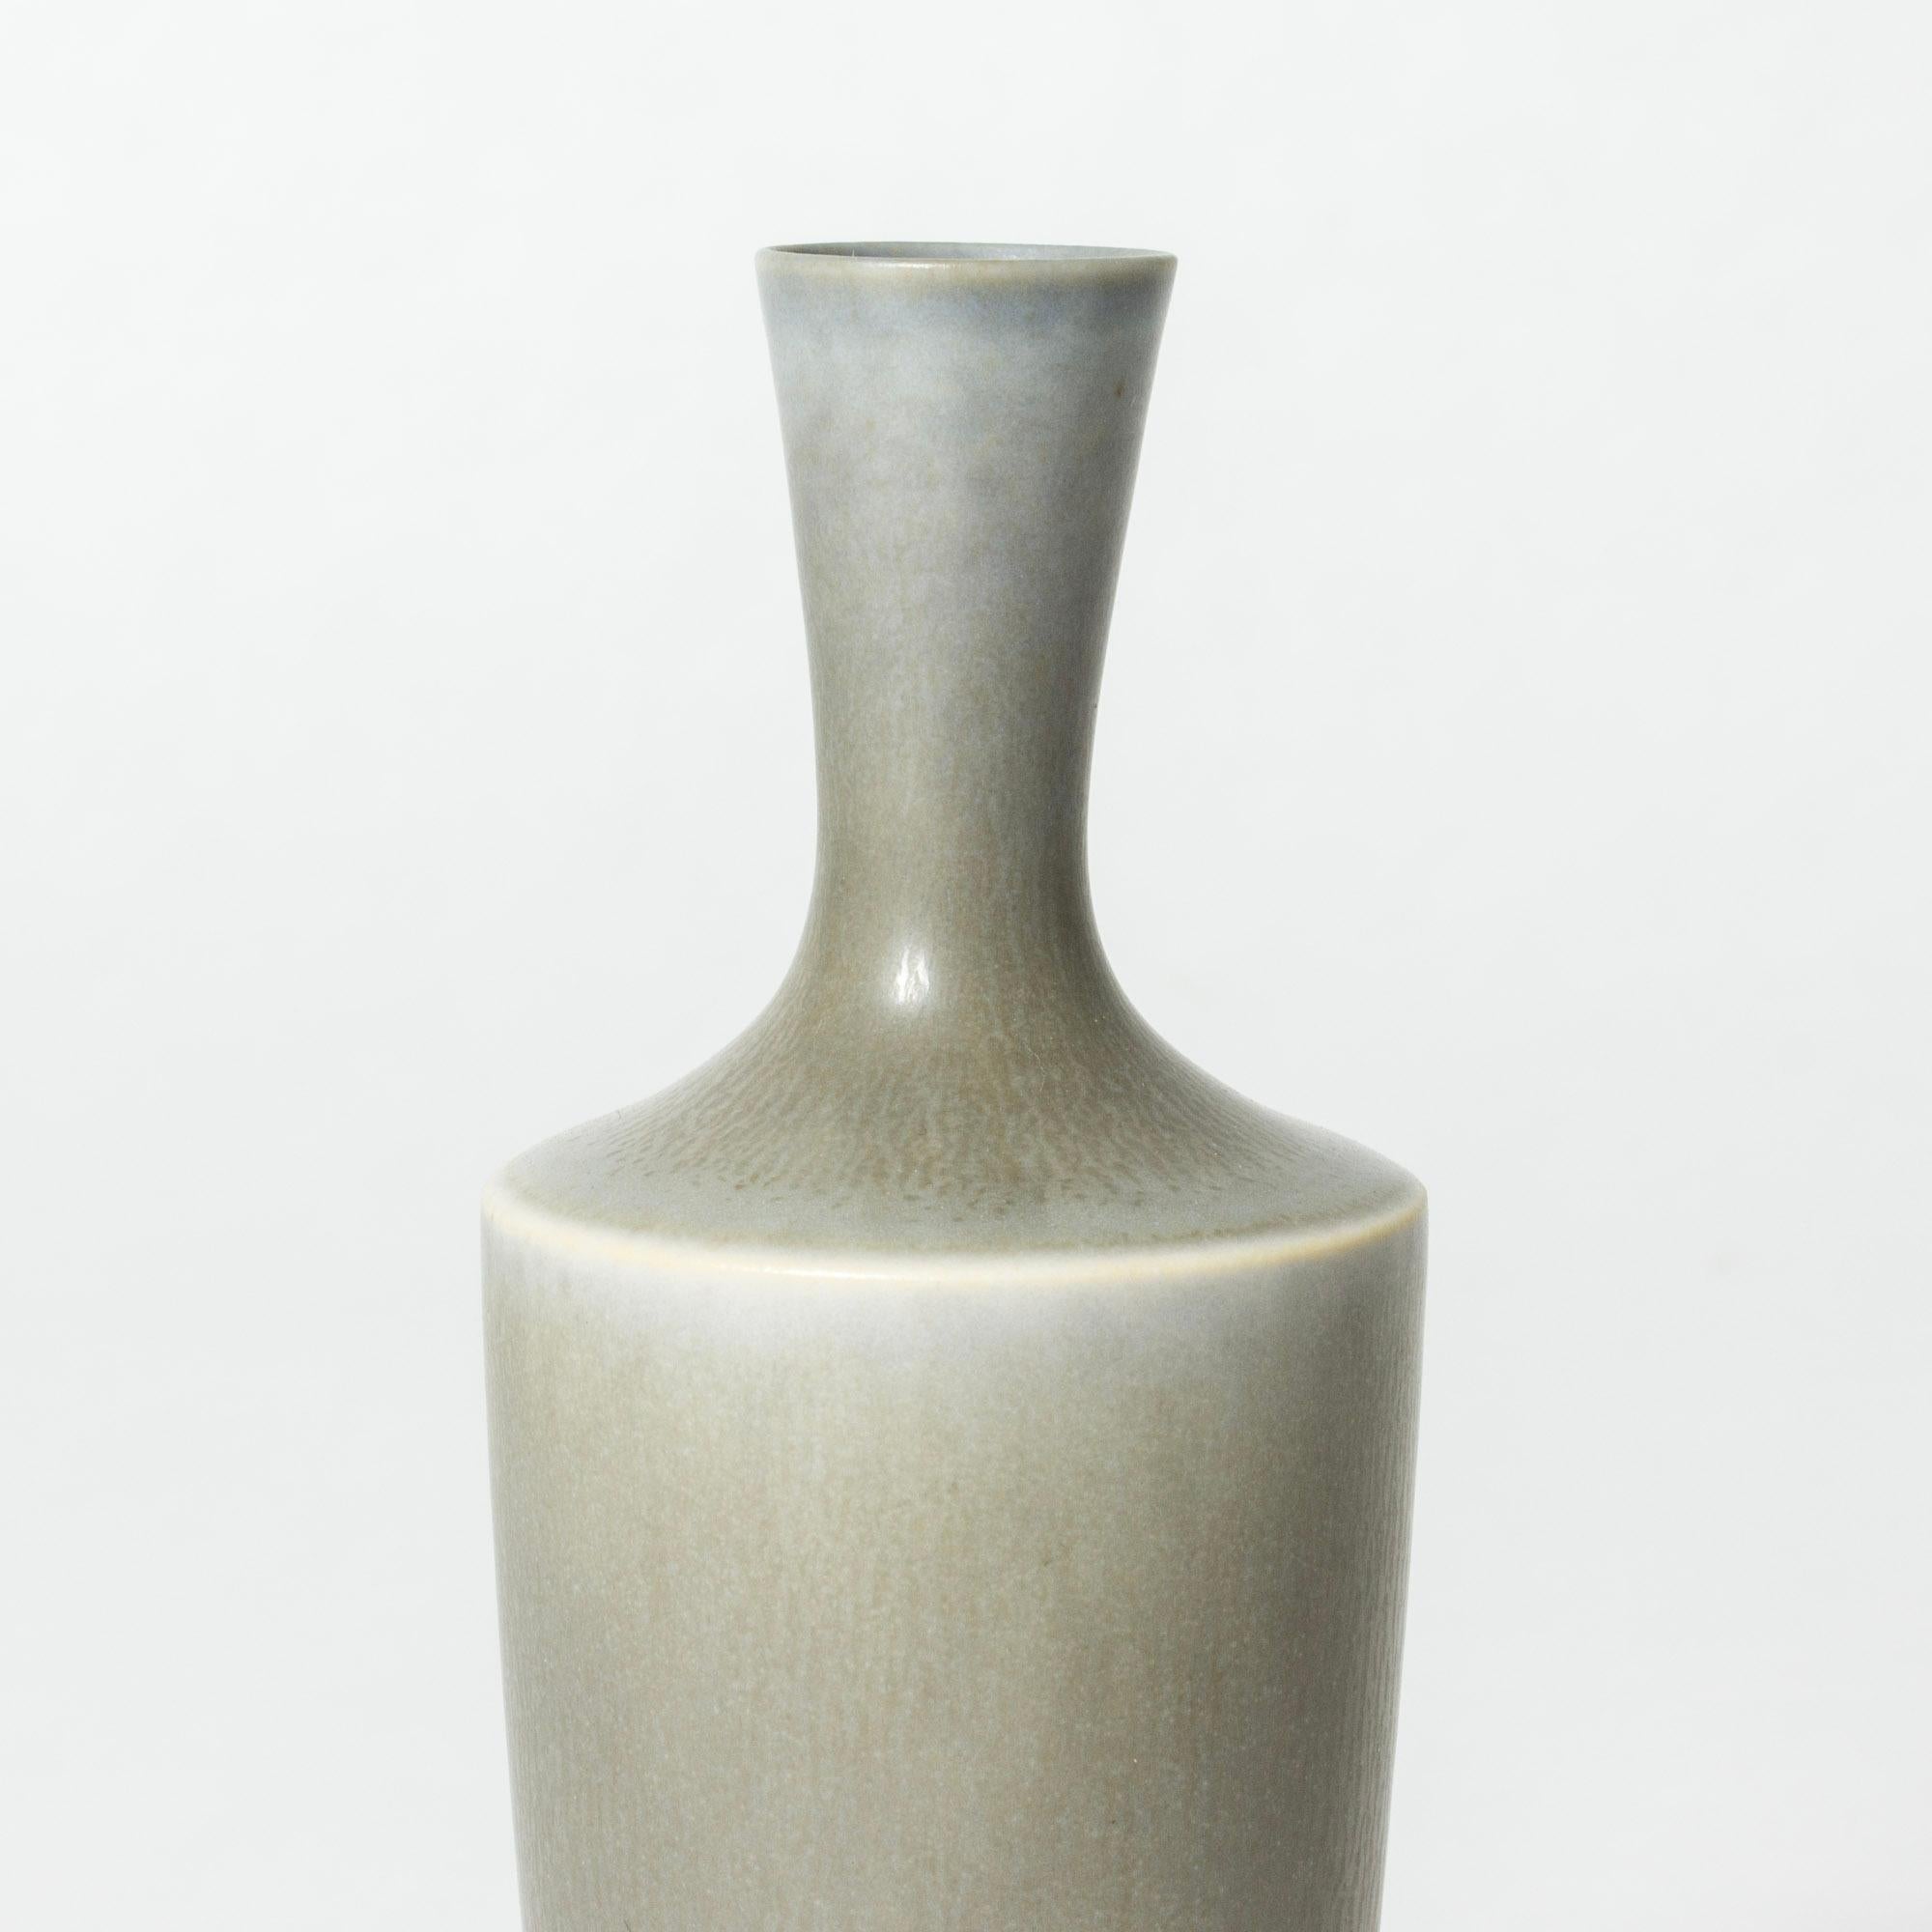 Stoneware vase by Berndt Friberg in an elegant, statuesque form. Pale blueish grey hare’s fur glaze.

Berndt Friberg was a Swedish ceramicist, renowned for his stoneware vases and vessels for Gustavsberg. His pure, composed designs with satiny,